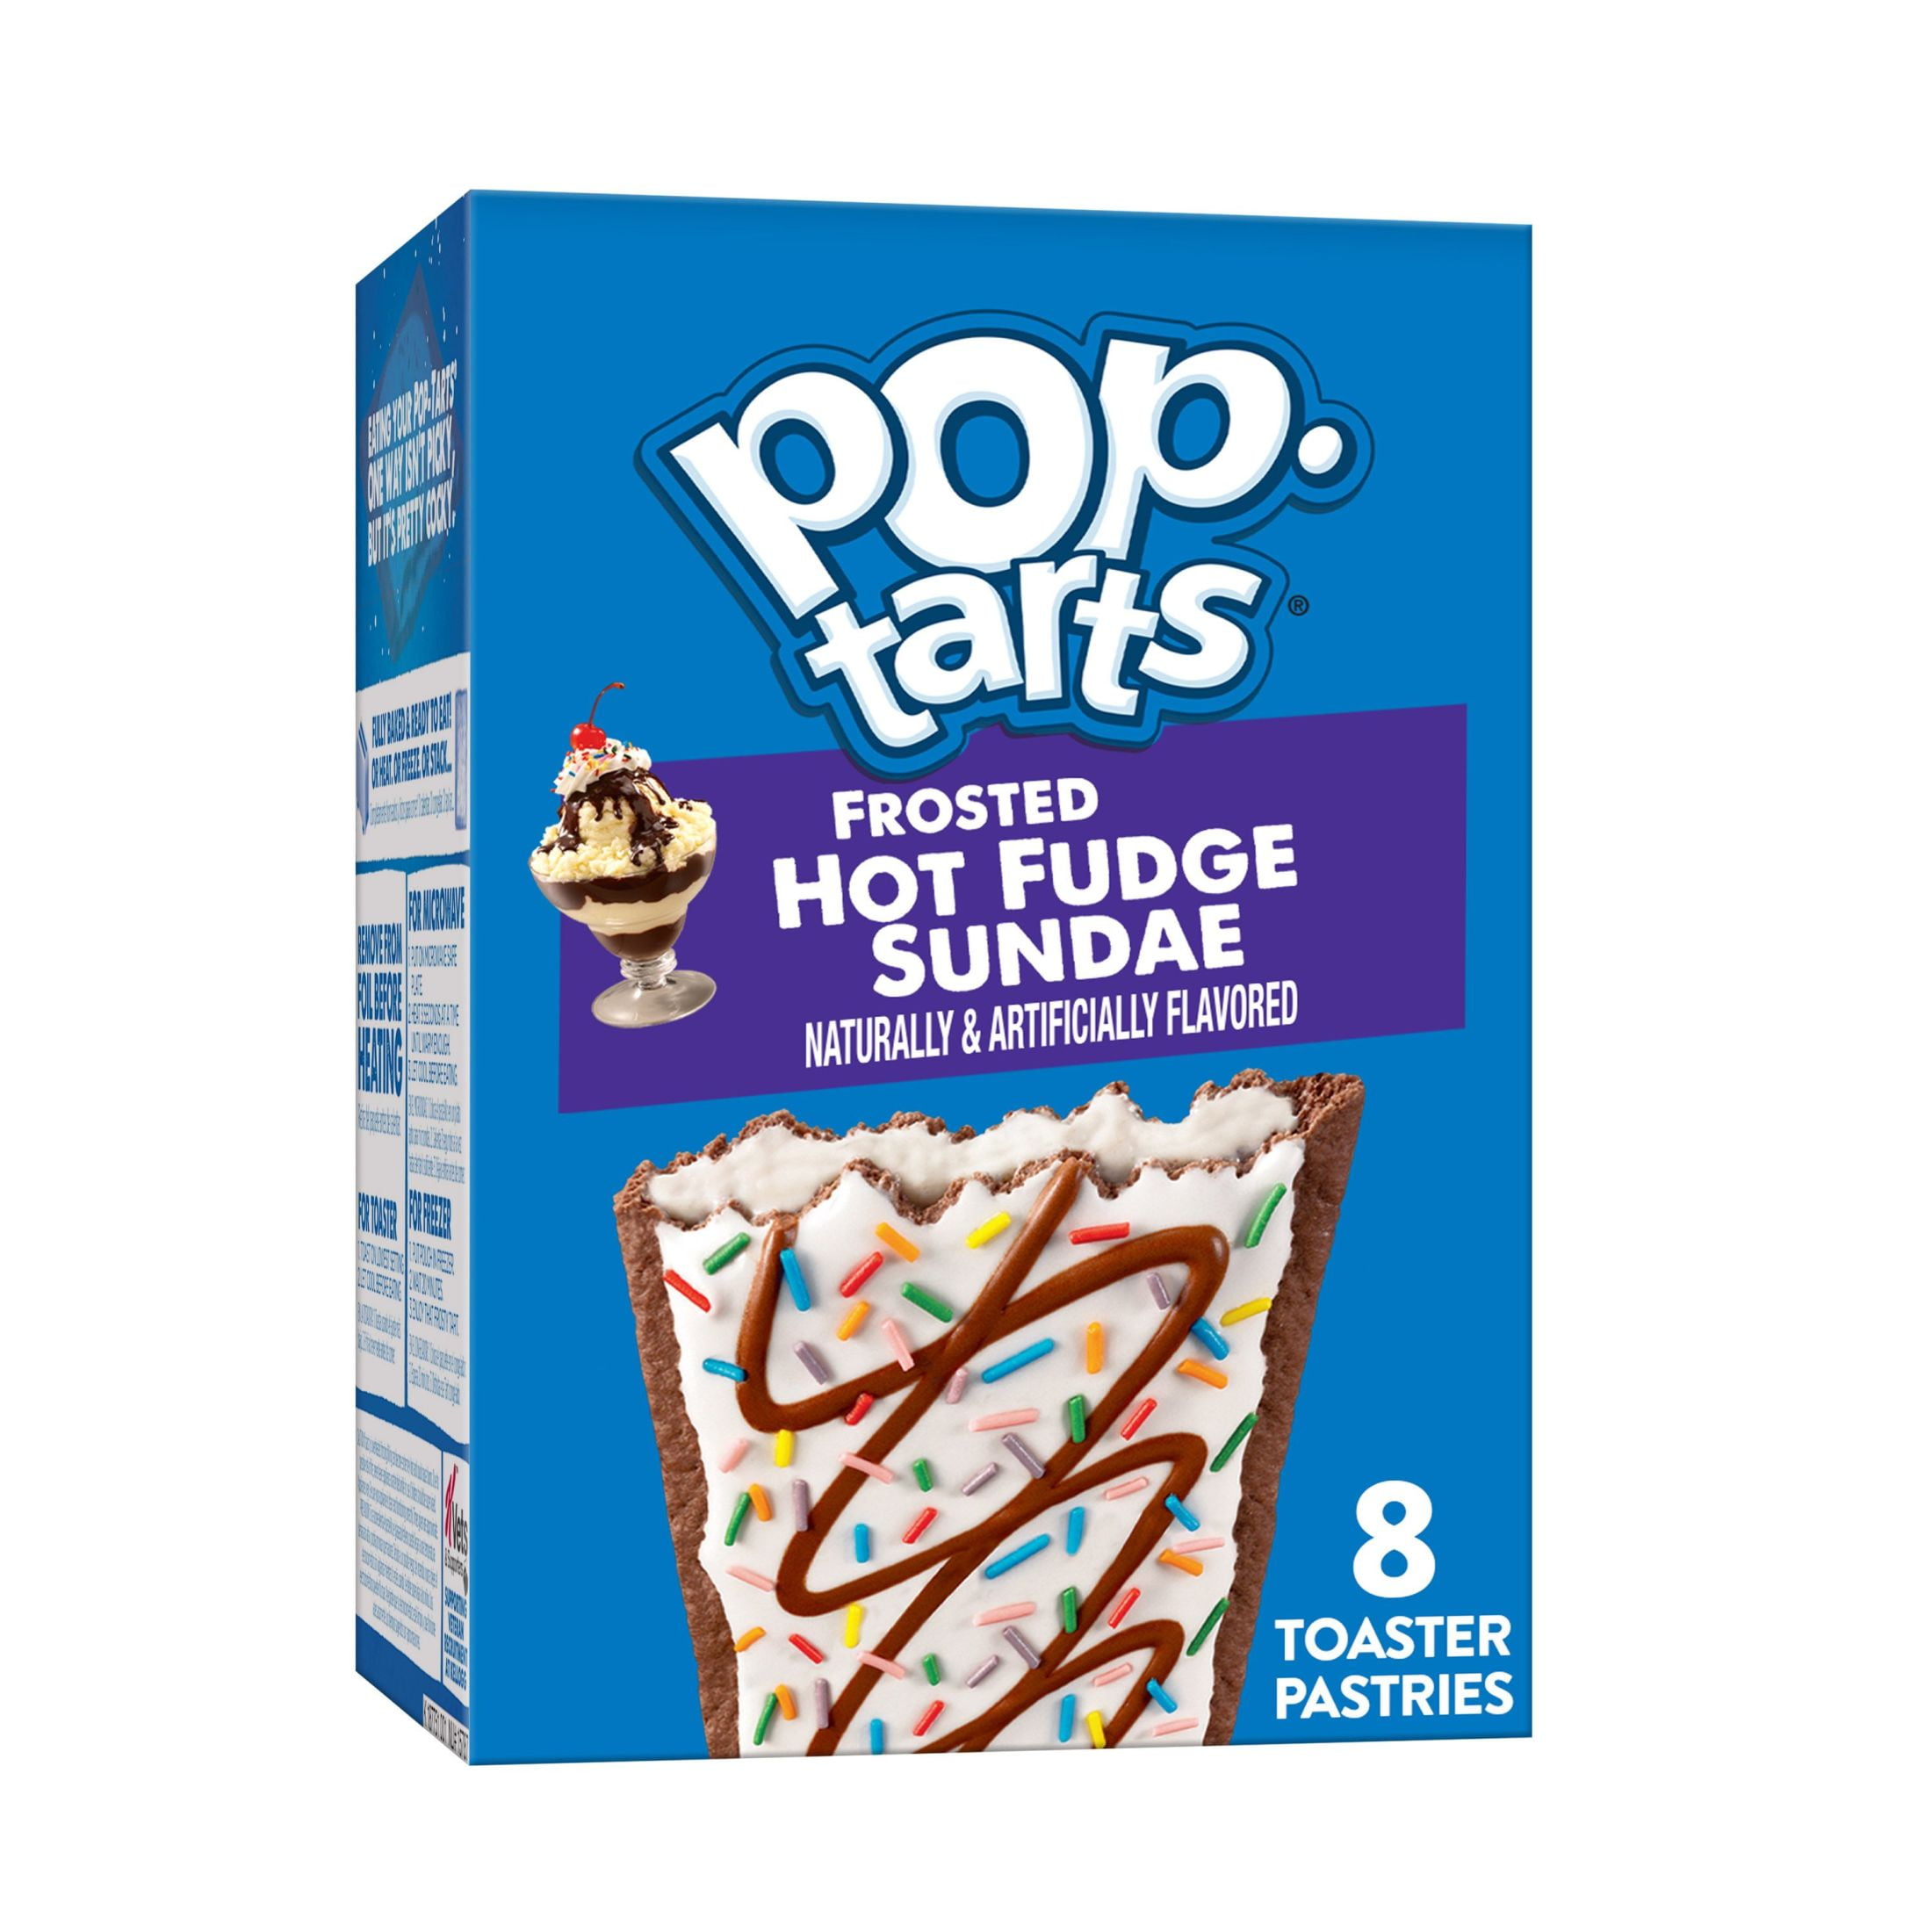 Pop-Tarts Toaster Pastries, Frosted Hot Fudge Sundae, 13.5 oz, 8 Count